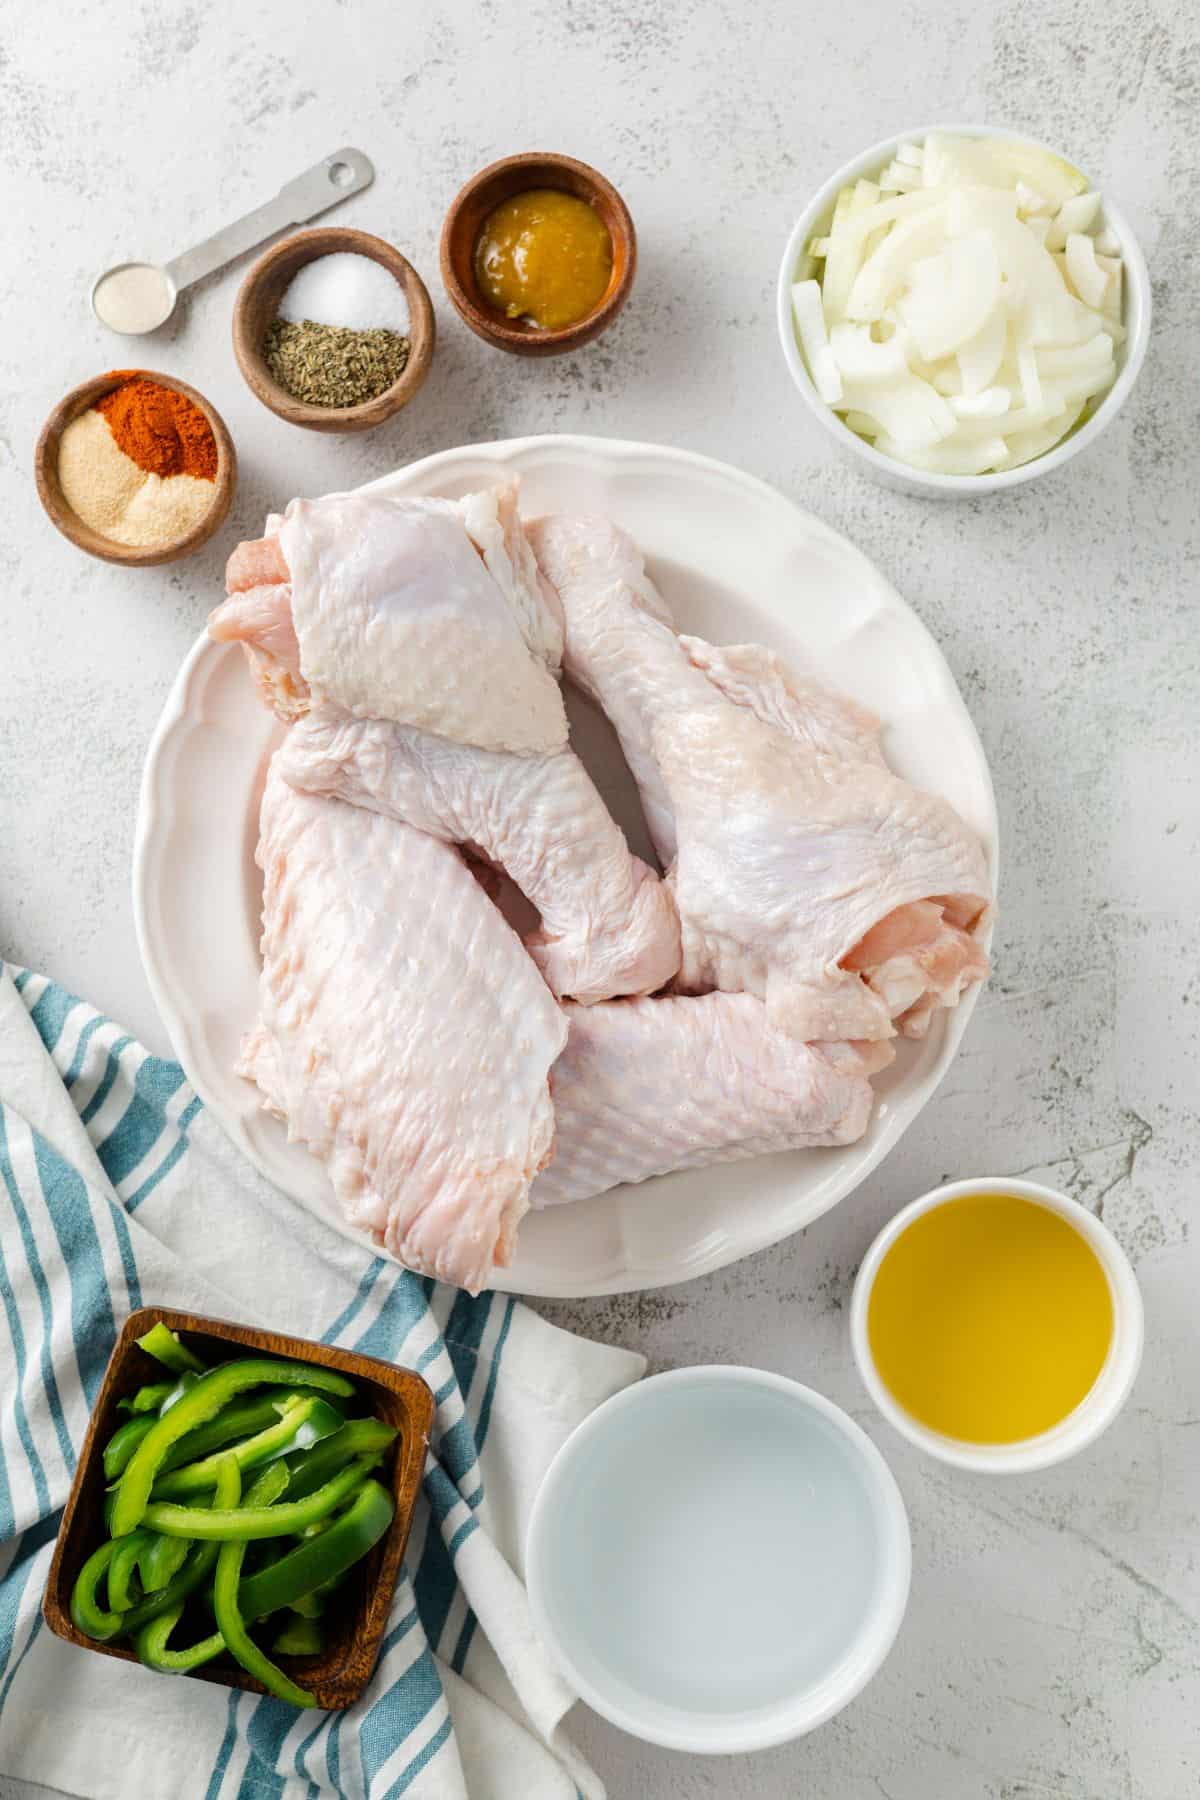 Overhead view of the ingredients needed for crockpot turkey wings: a plate of turkey wings, a bowl of green bell peppers, a bowl of onions, a bowl of oil, a bowl of water, a bowl of broth paste, a bowl of salt and pepper, and a bowl of spices